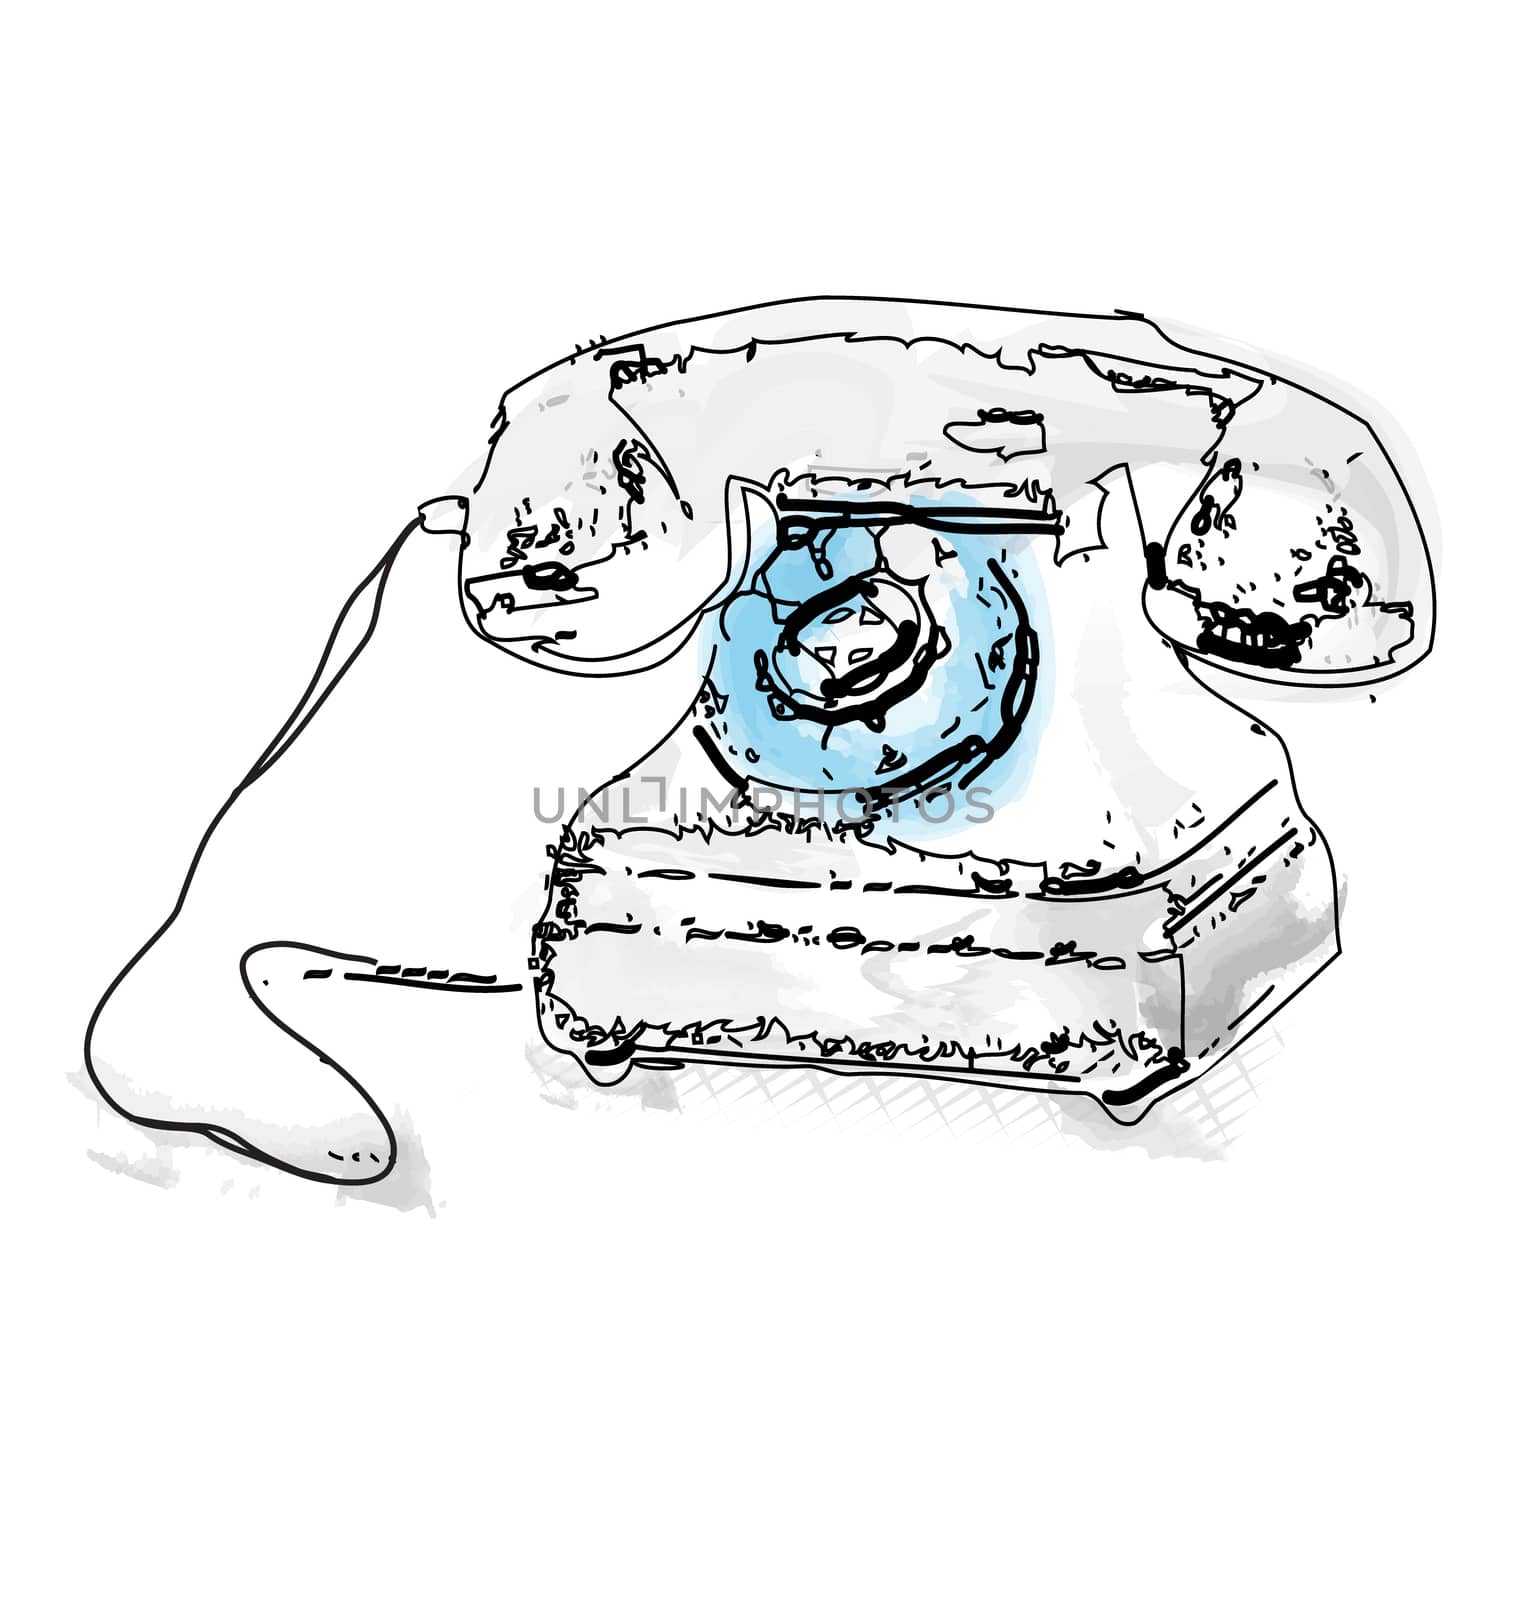 Colorful retro telephone illustration in watercolor style